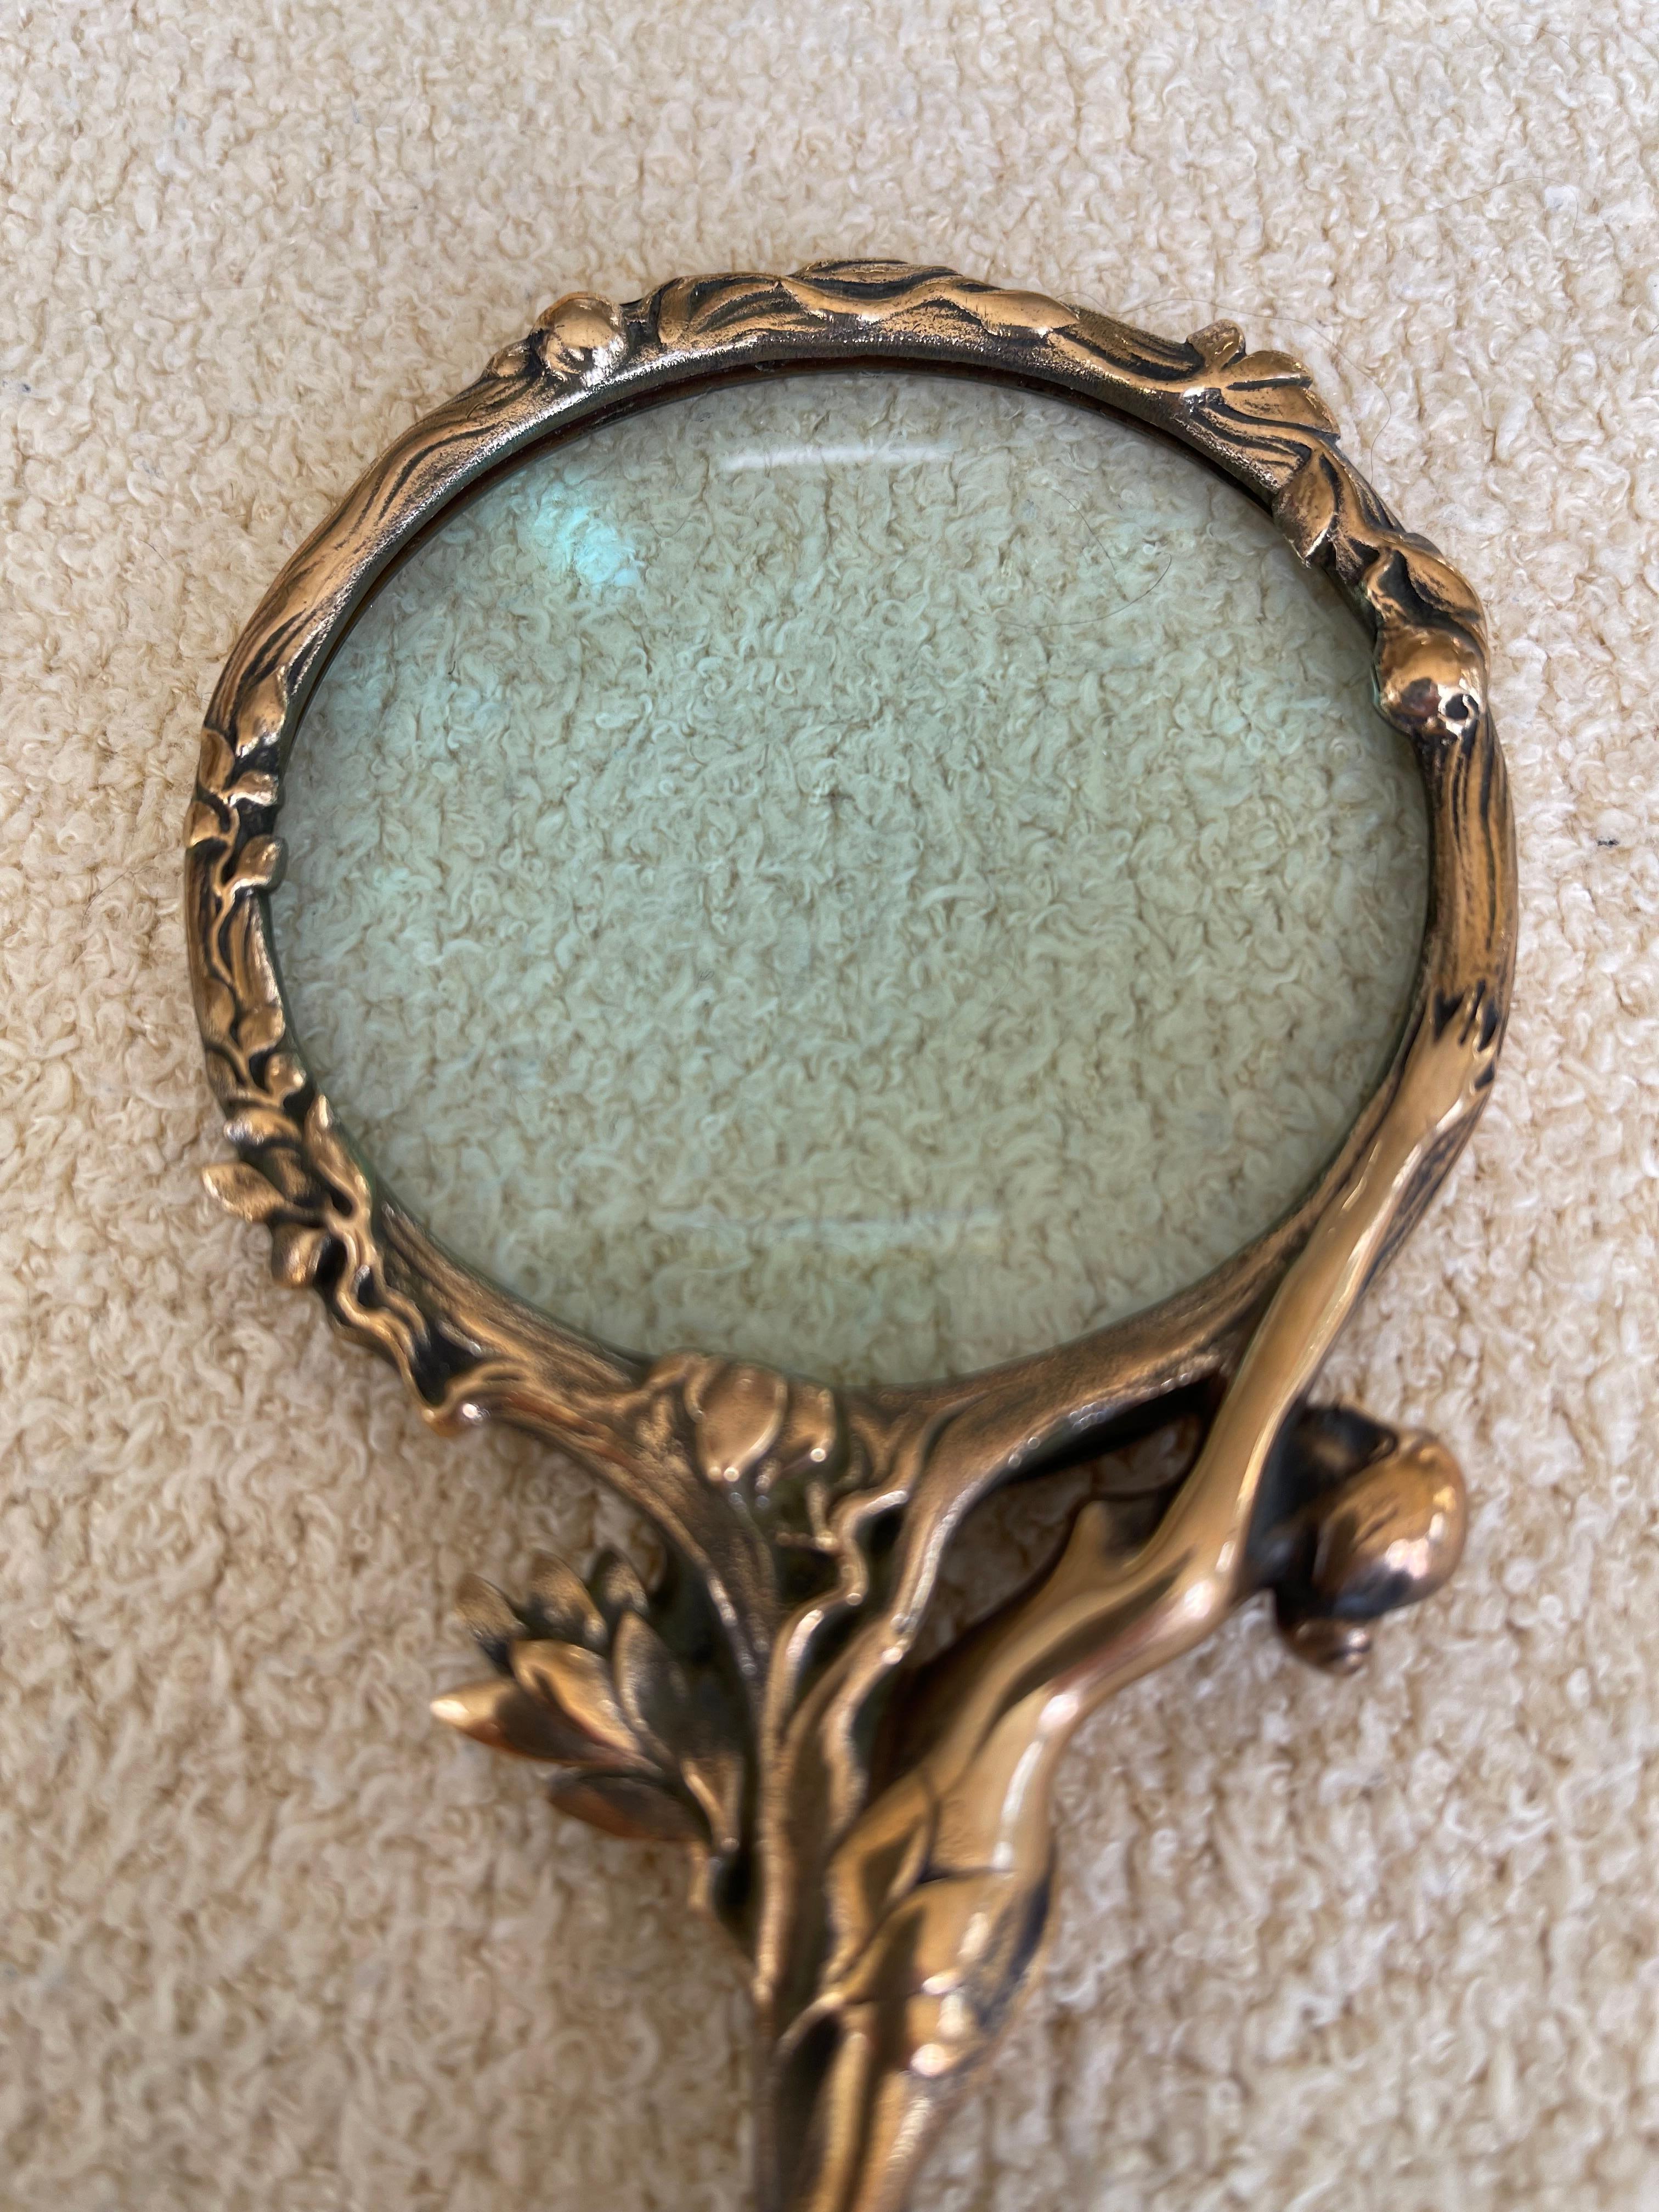  This lovely high quality magnifying glass makes a perfect piece for the art nouveau lover, or anyone who wants to hold a beautiful object when trying to magnify something. Note the nude wrapped around glass, a whimsical addition to be sure.
  Hard